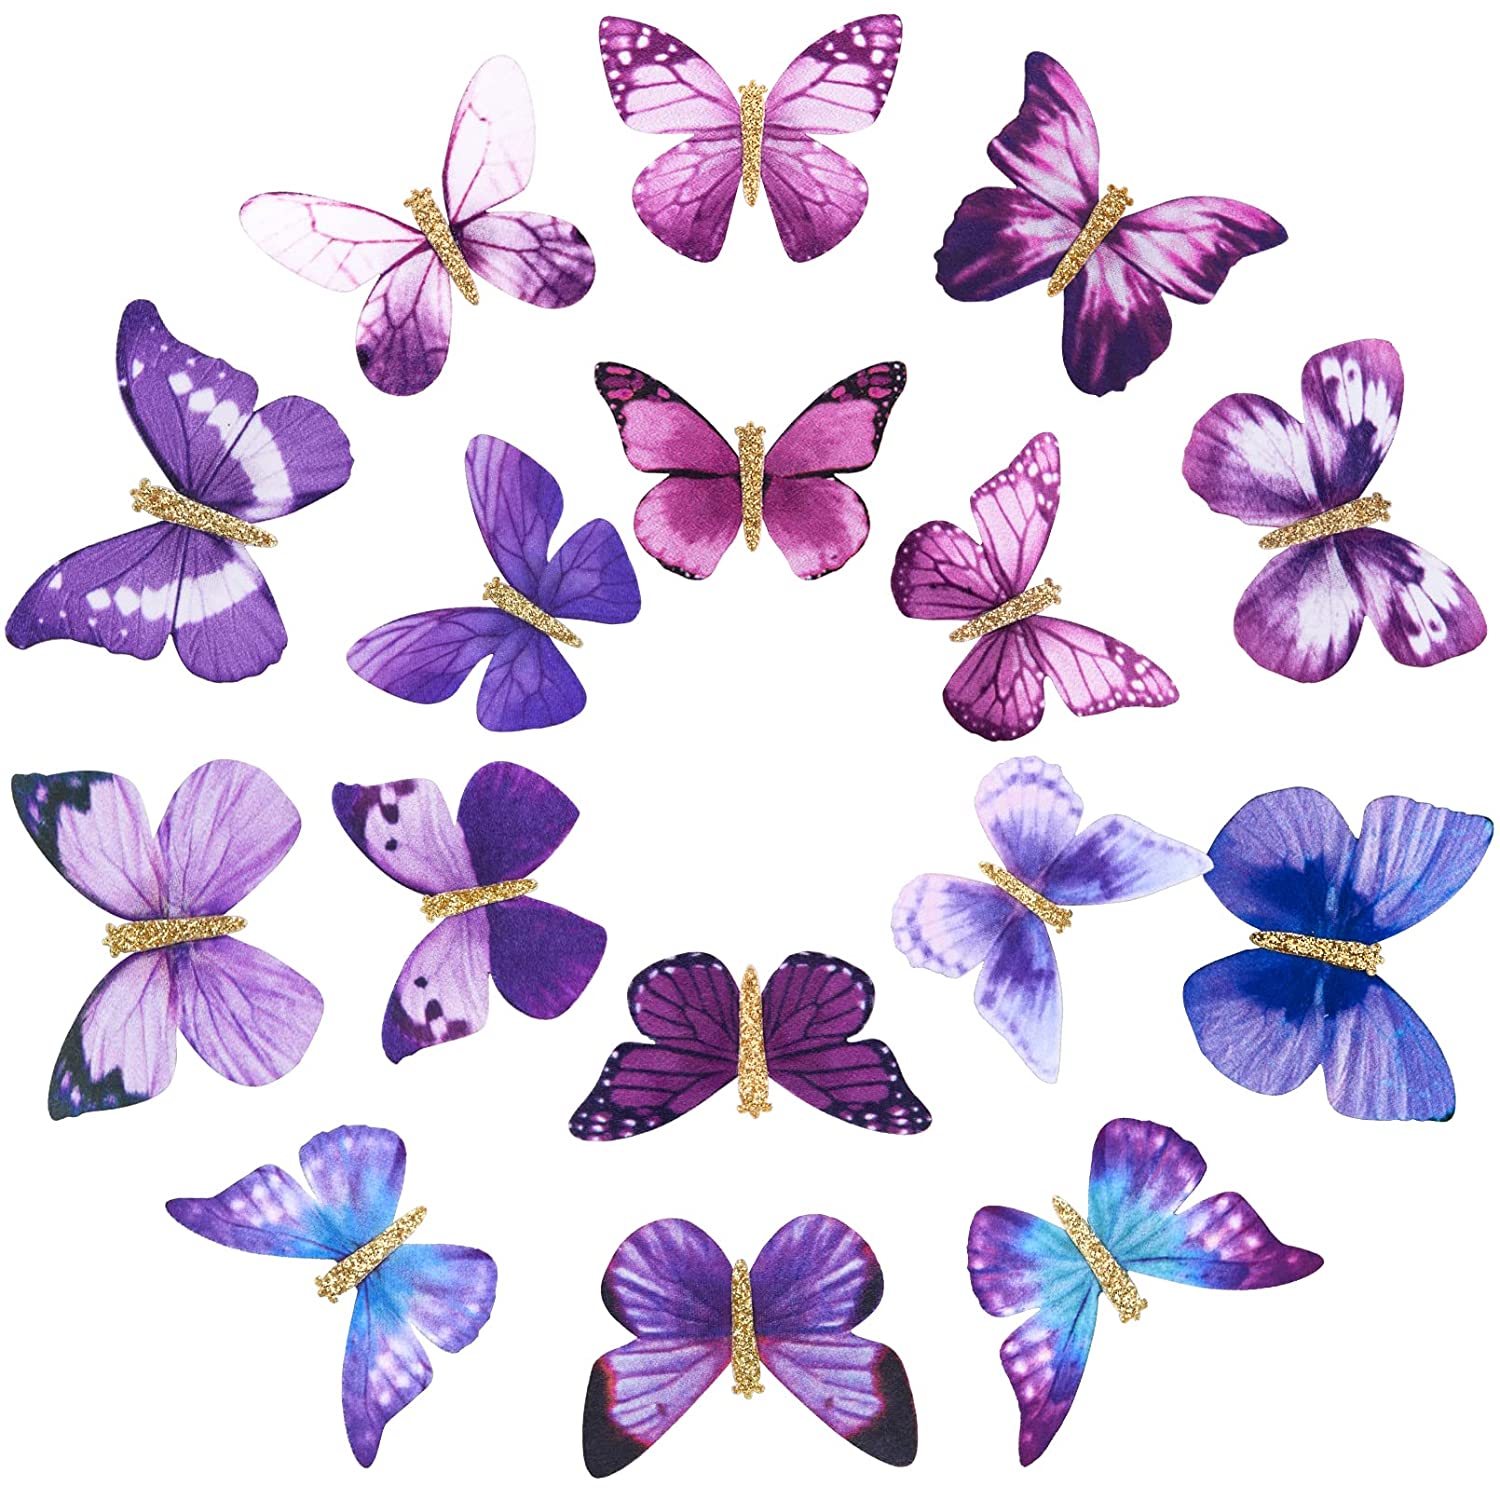 DEEKA 16 PCS Butterfly Hair Clips Small Realistic Colorful Handmade 90s Hair Clips Barrette Hair Accessories for Women and Girls -Purple